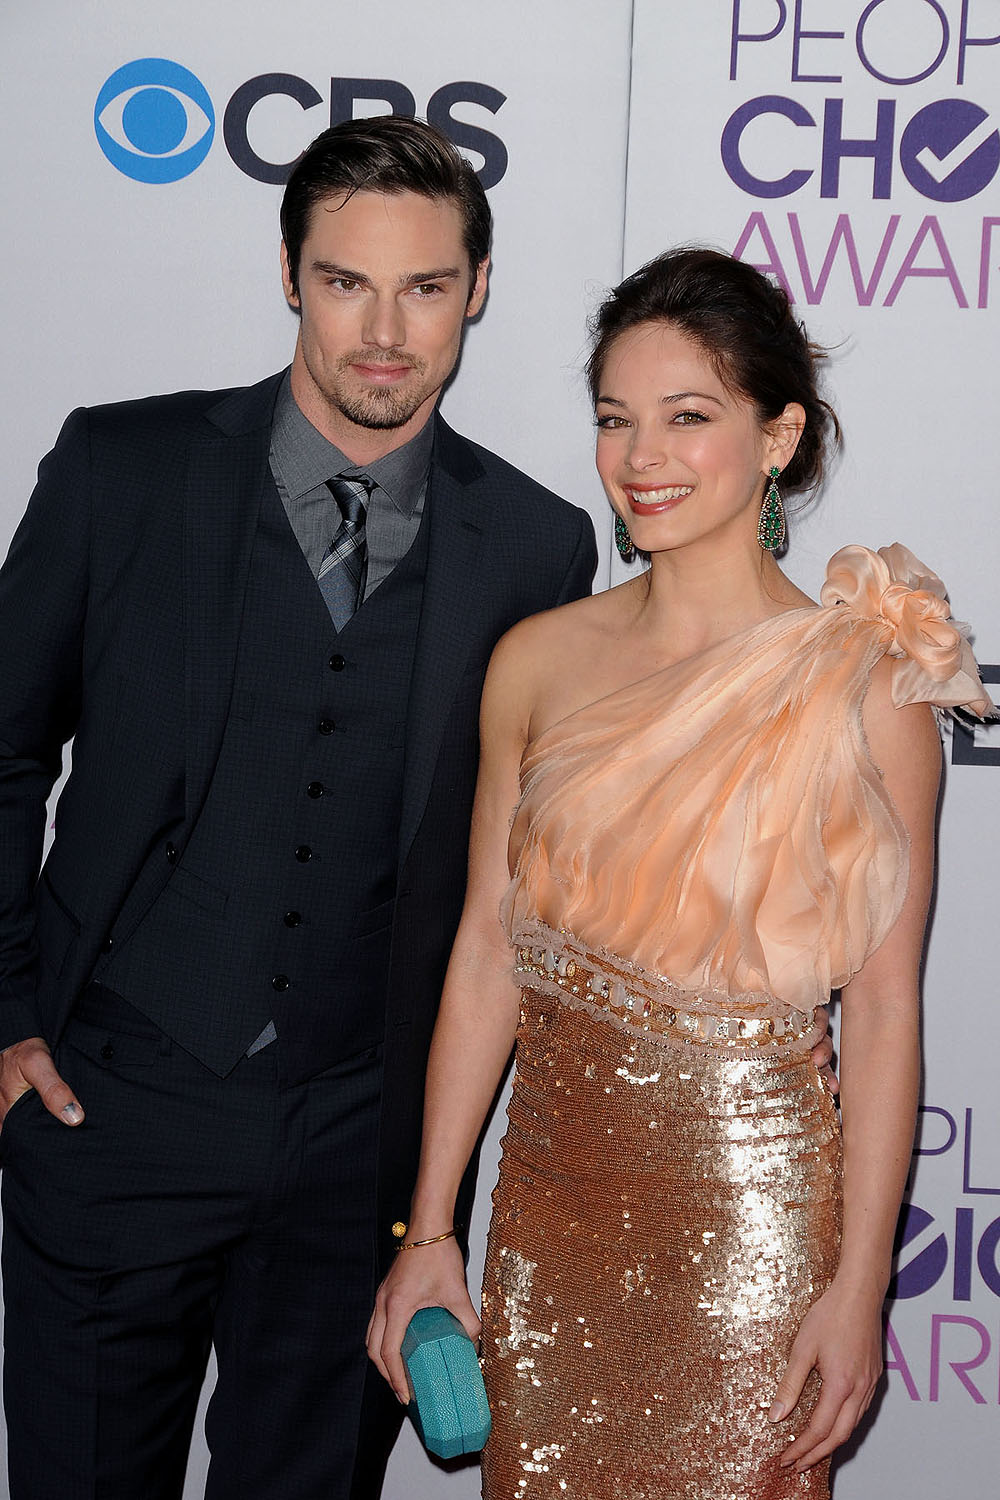 Kristin Kreuk and Jay Ryan at the PEOPLE'S CHOICE AWARDS for Best New ...